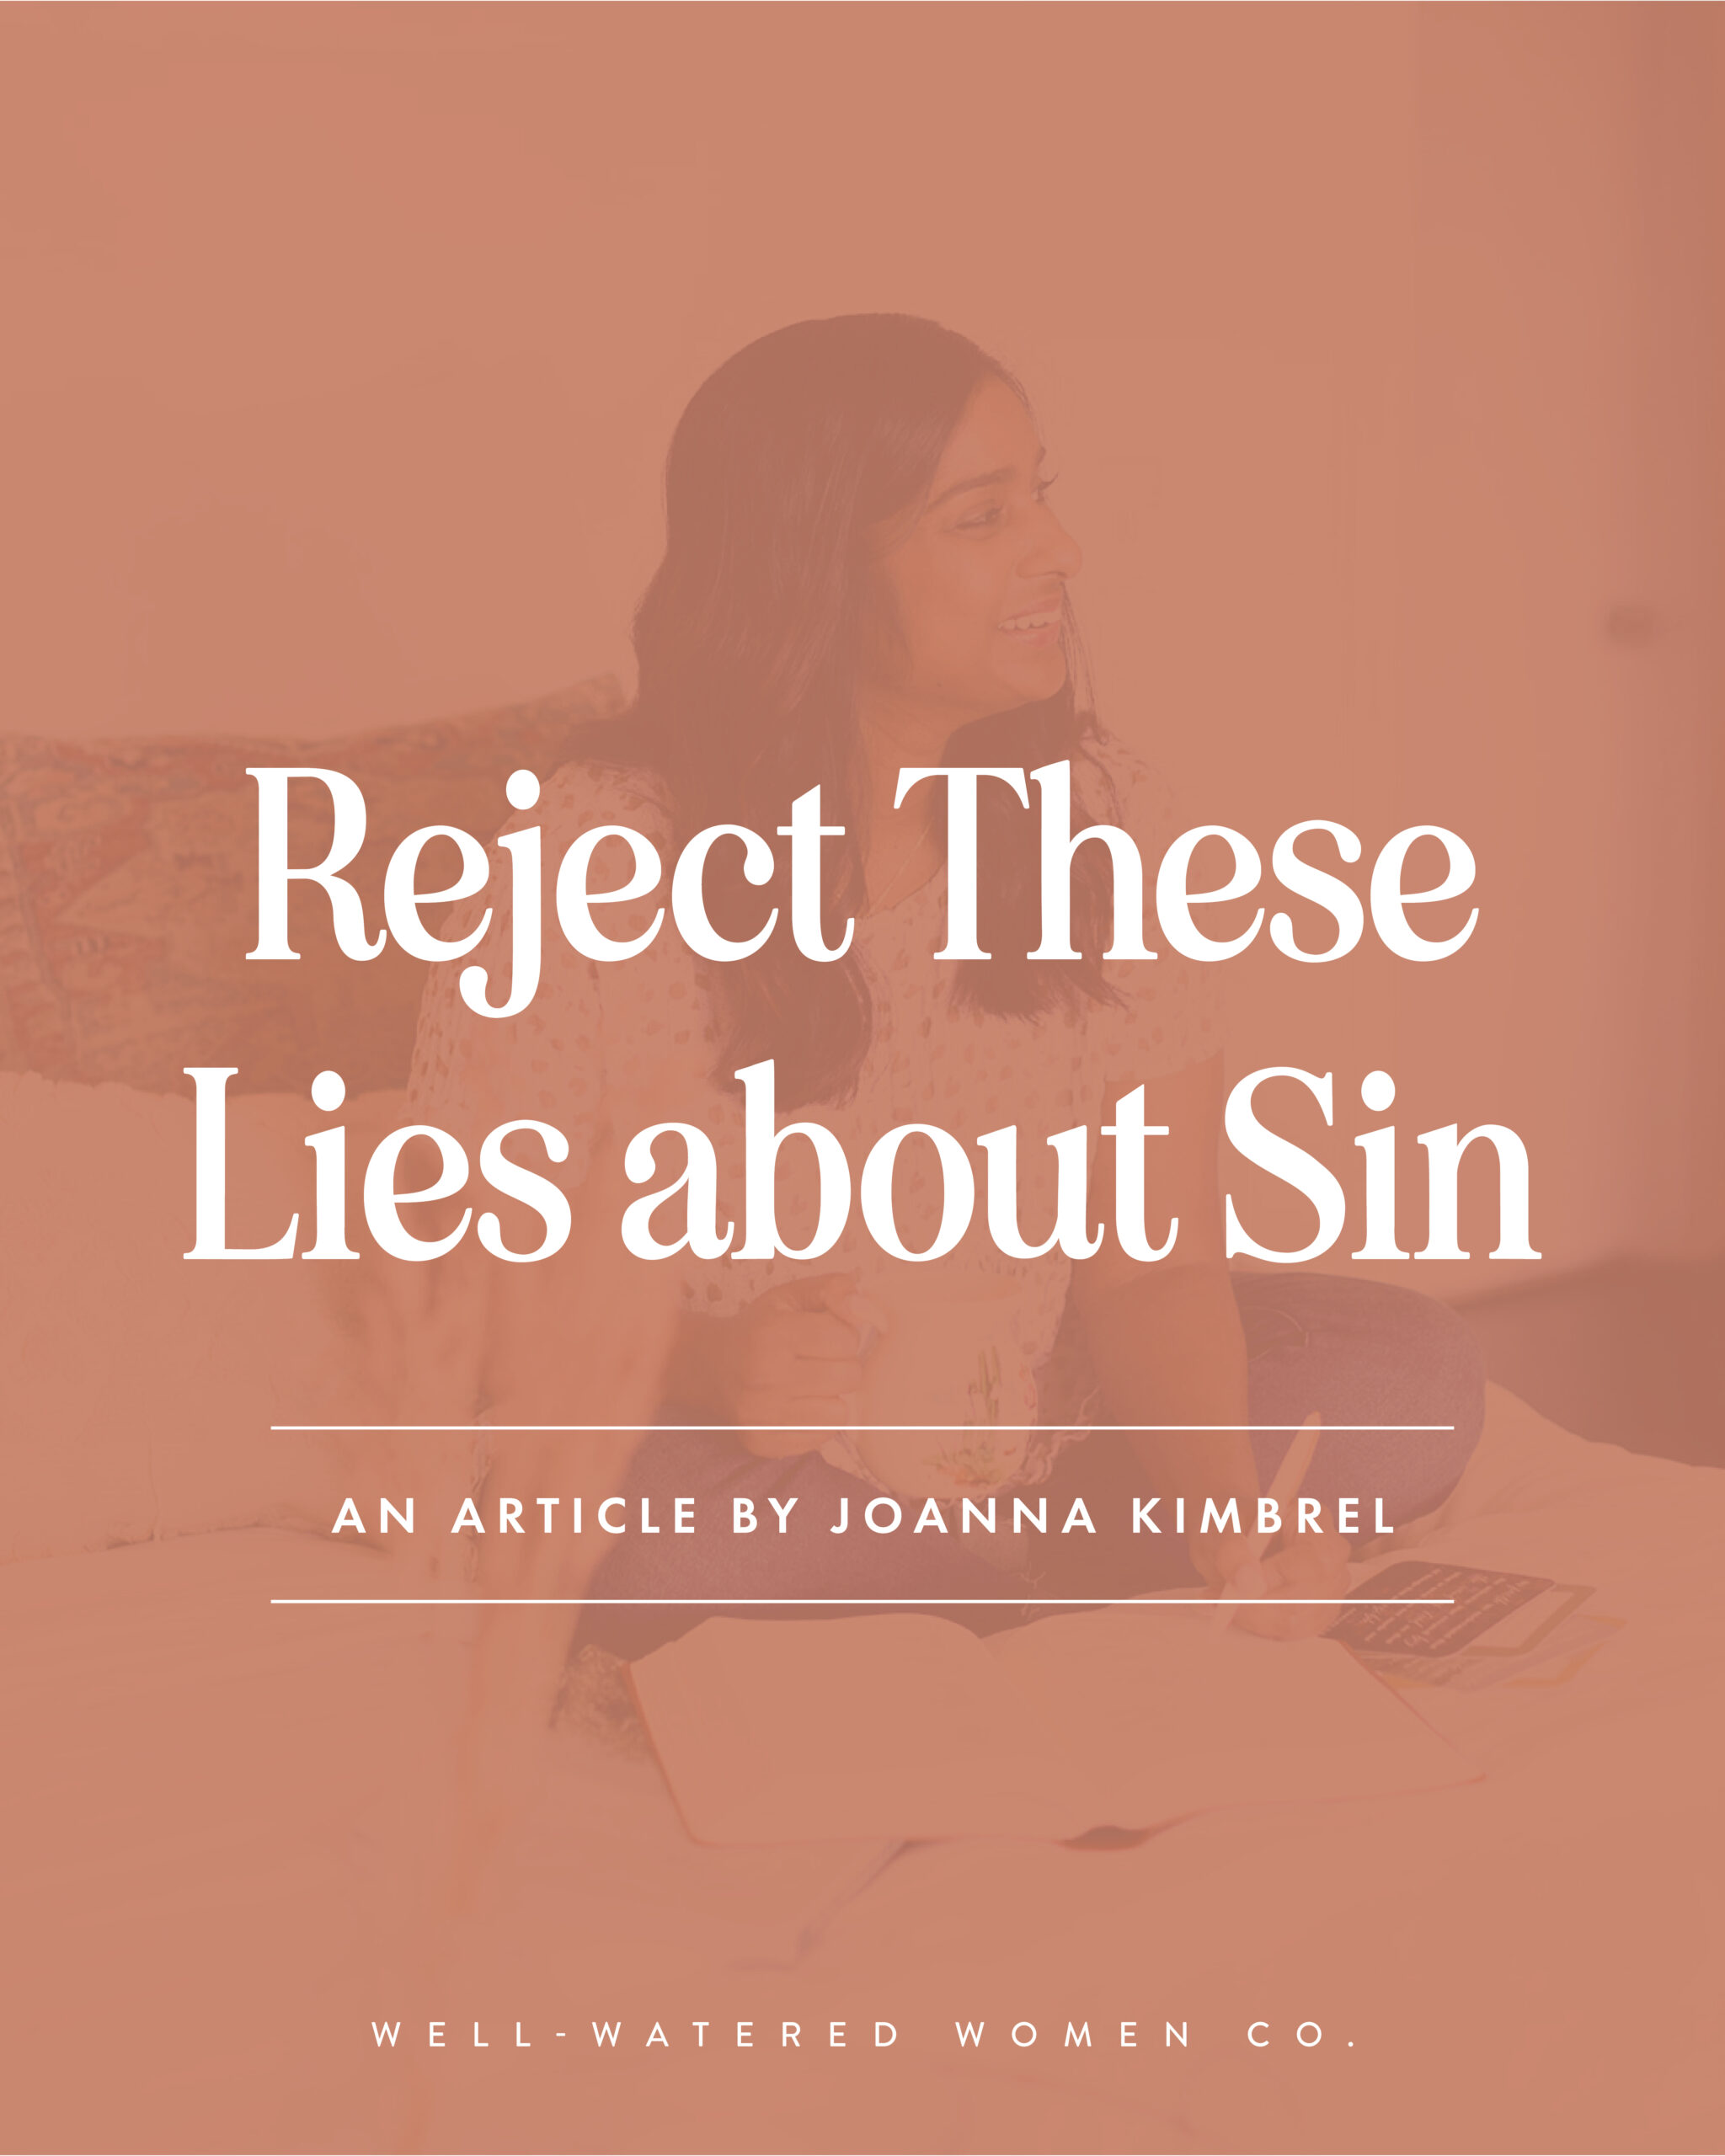 Reject These Lies about Sin - an article from Well-Watered Women